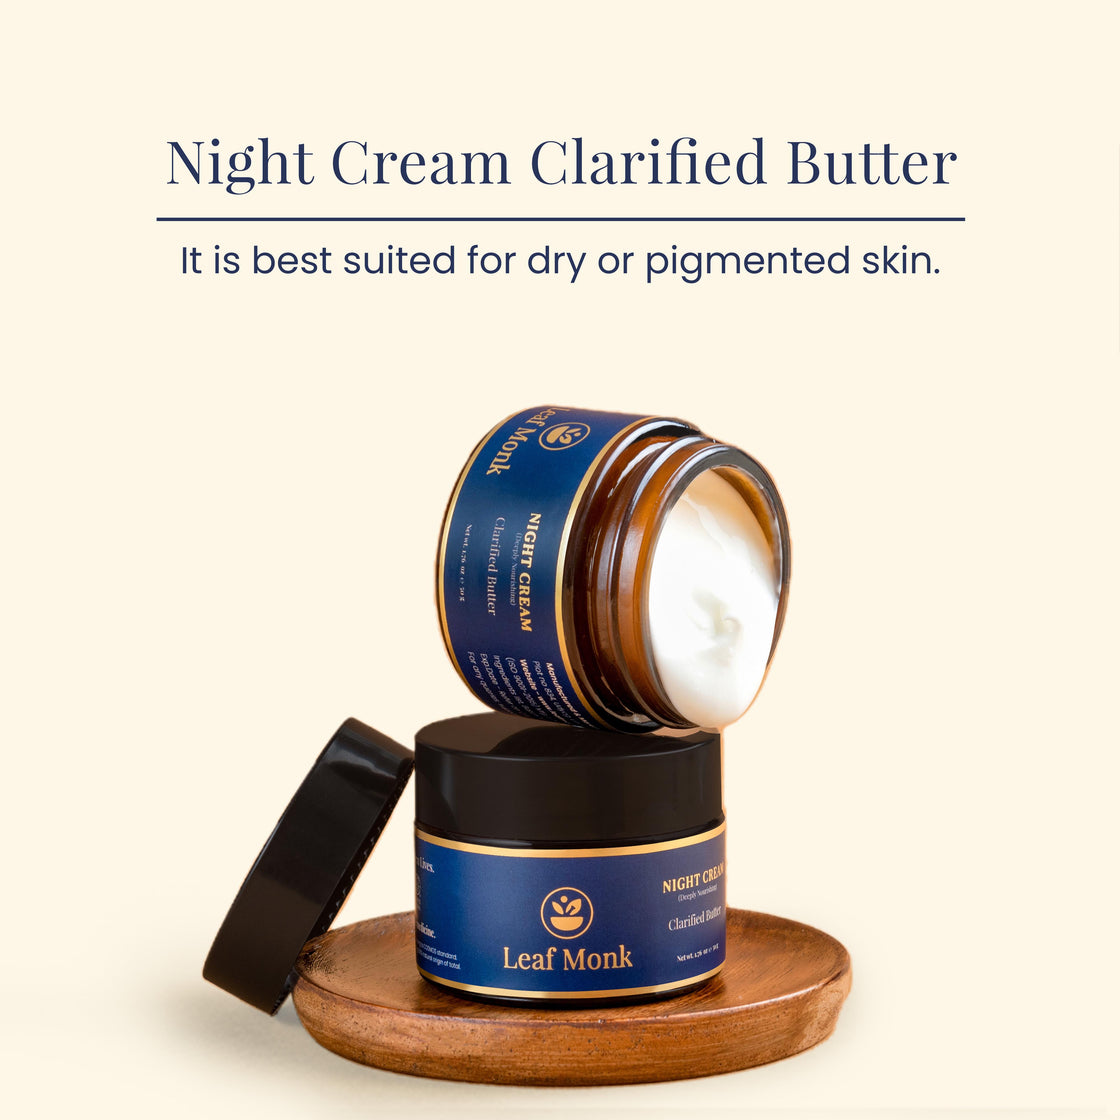 Night Cream with Clarified Butter